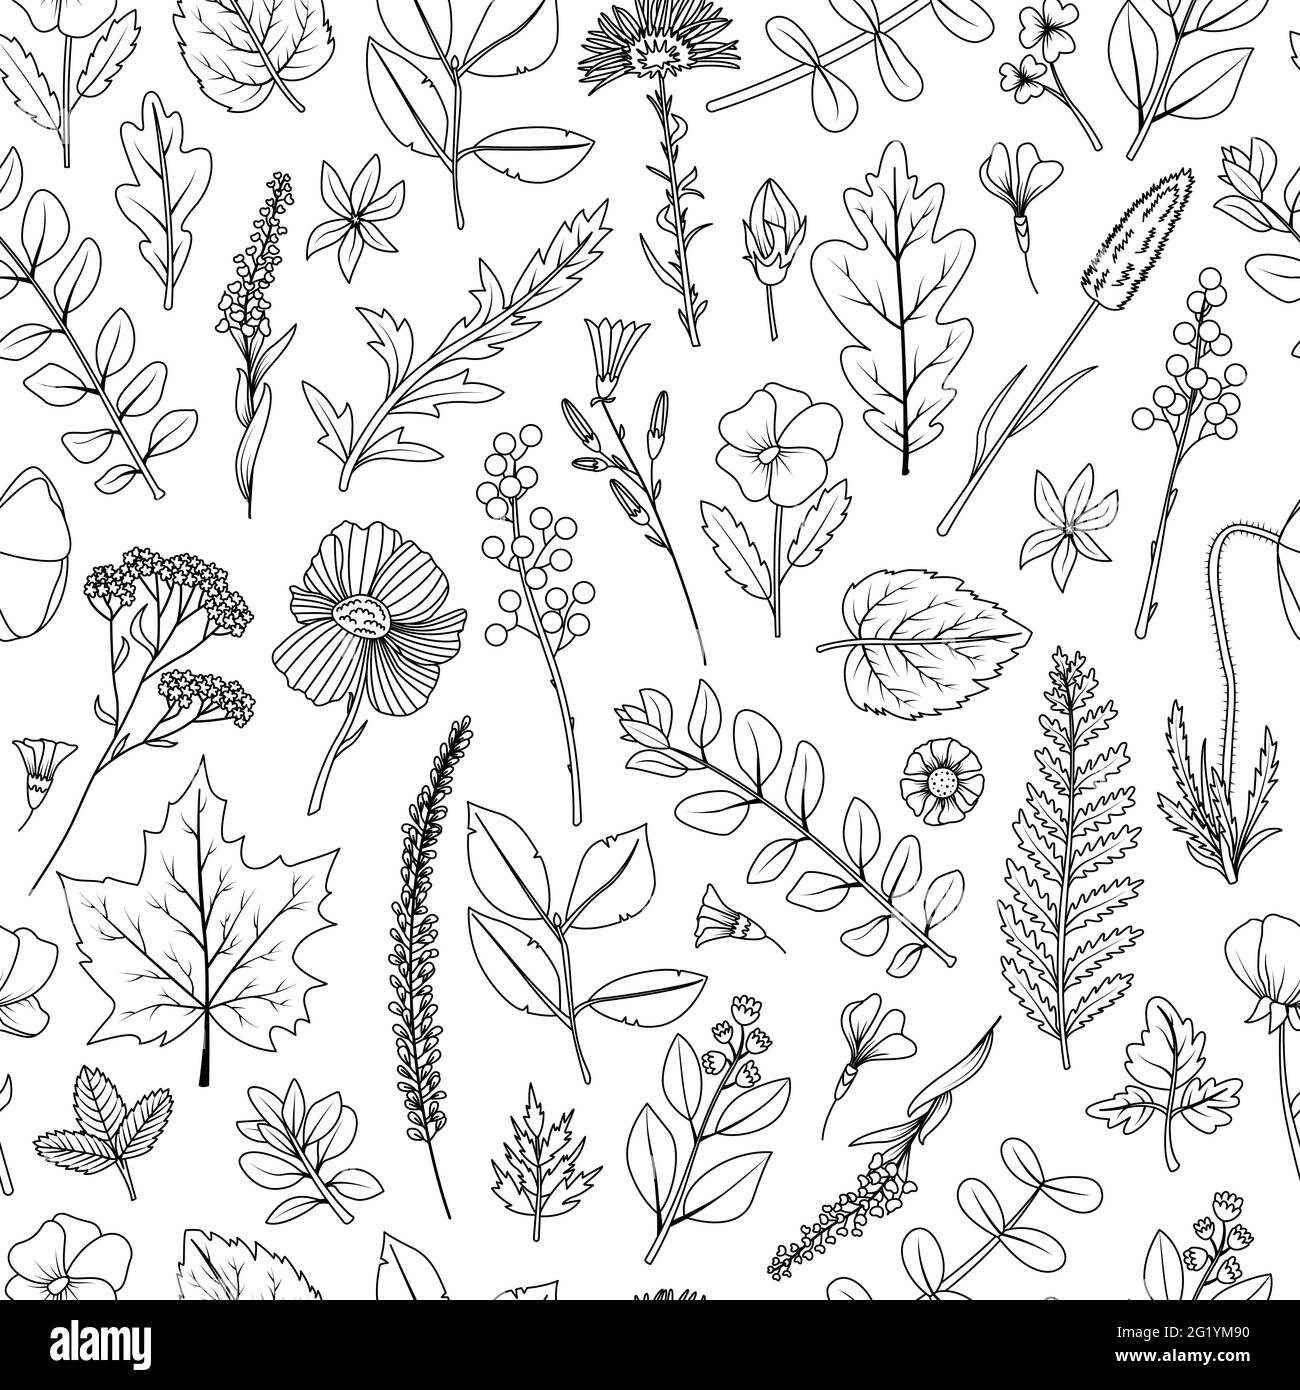 A seamless pattern of dried leaves and flowers for the herbarium. Stock Vector